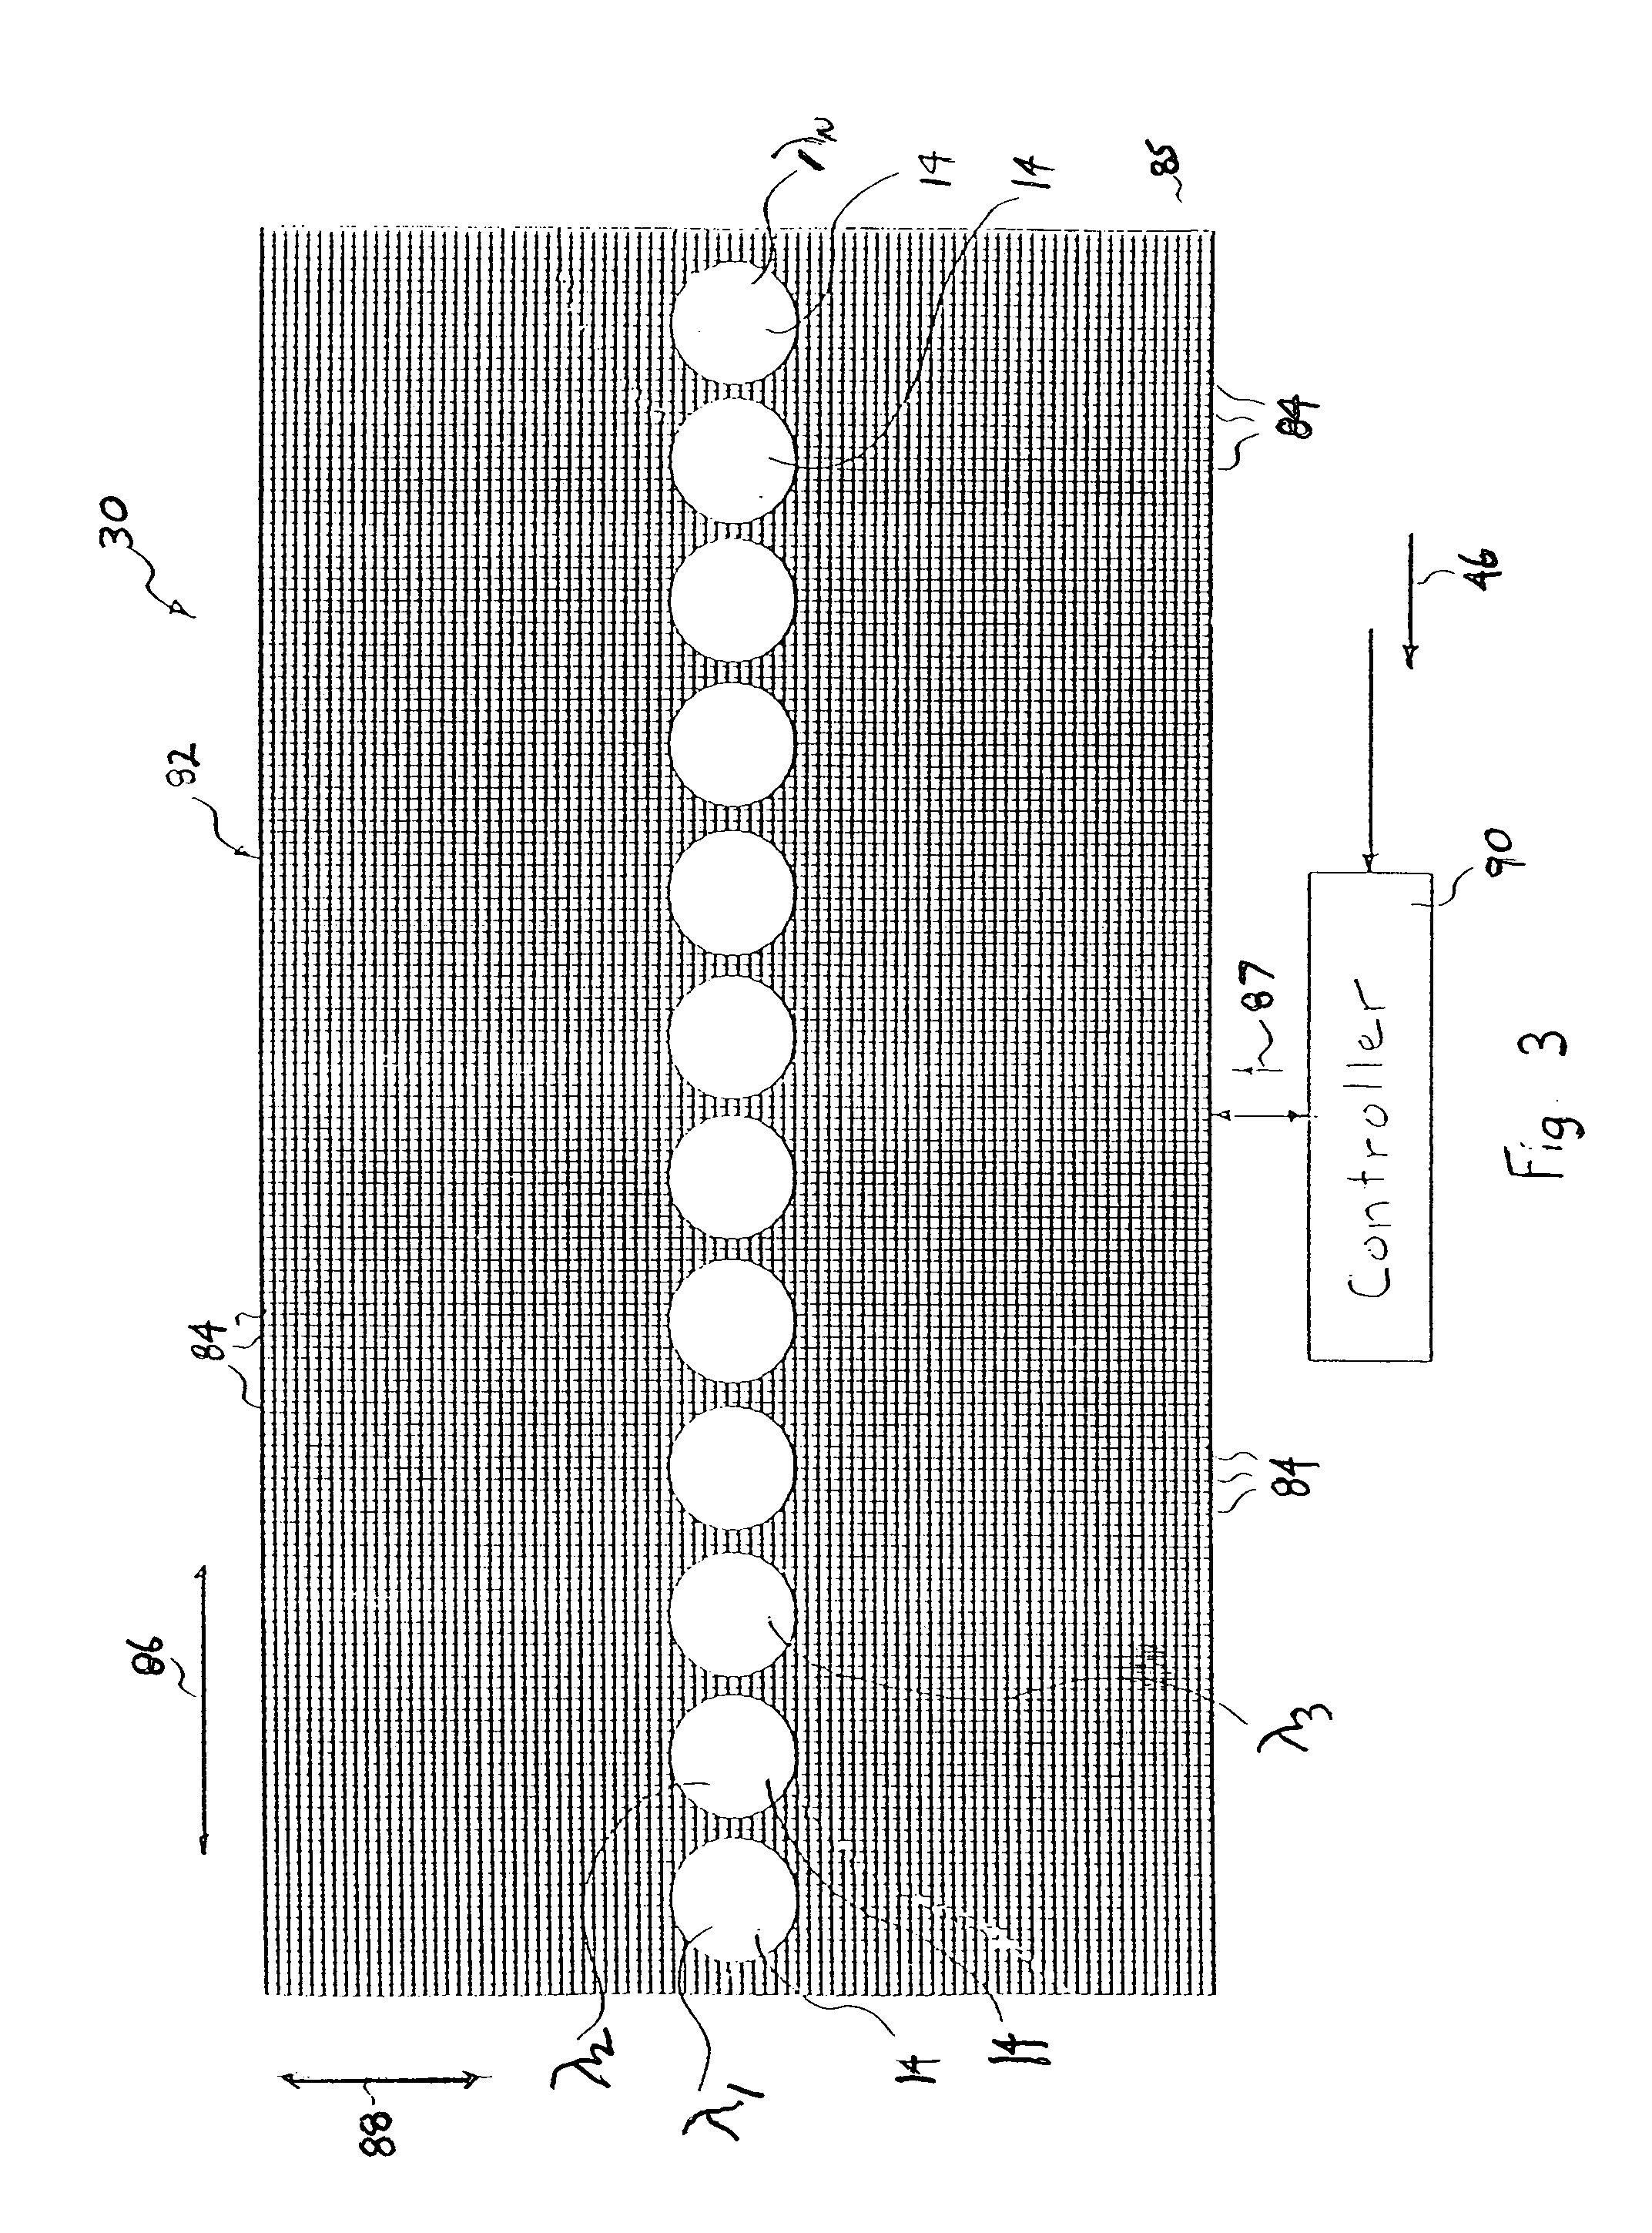 Multifunctional optical device having a spatial light modulator with an array of micromirrors